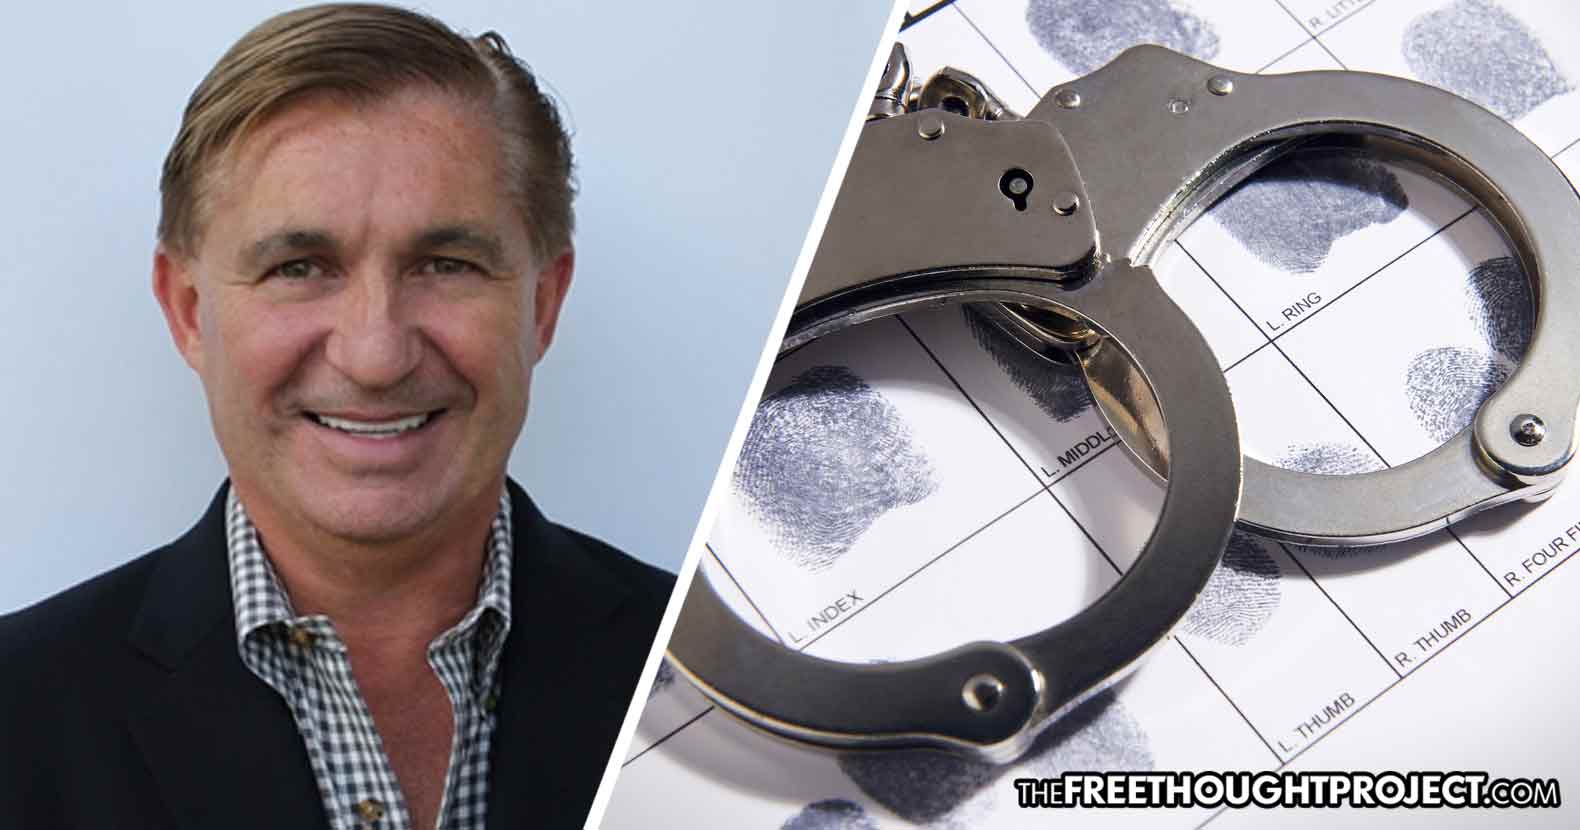 CEO of Global Food Distribution Company Arrested for Child Sex Trafficking